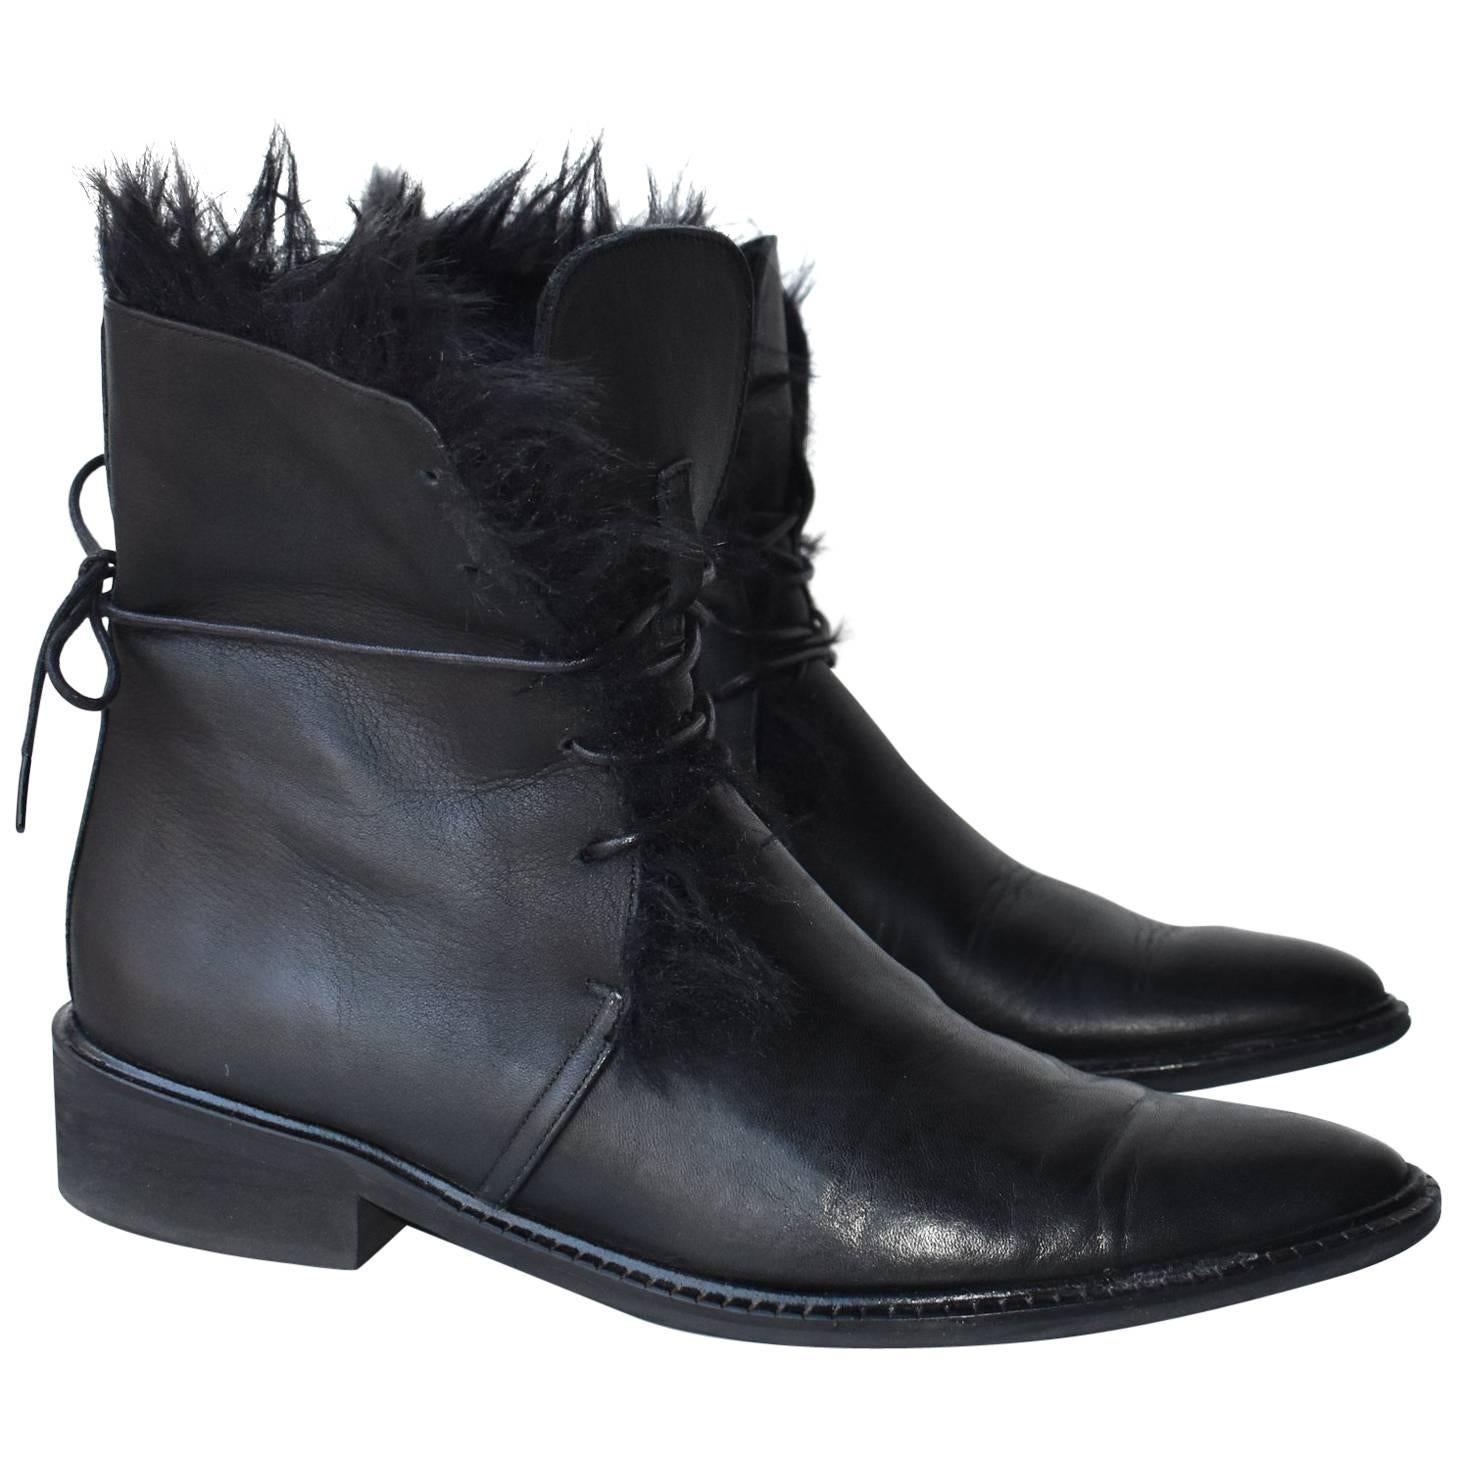 Y's Fur Lined Leather Boots For Sale